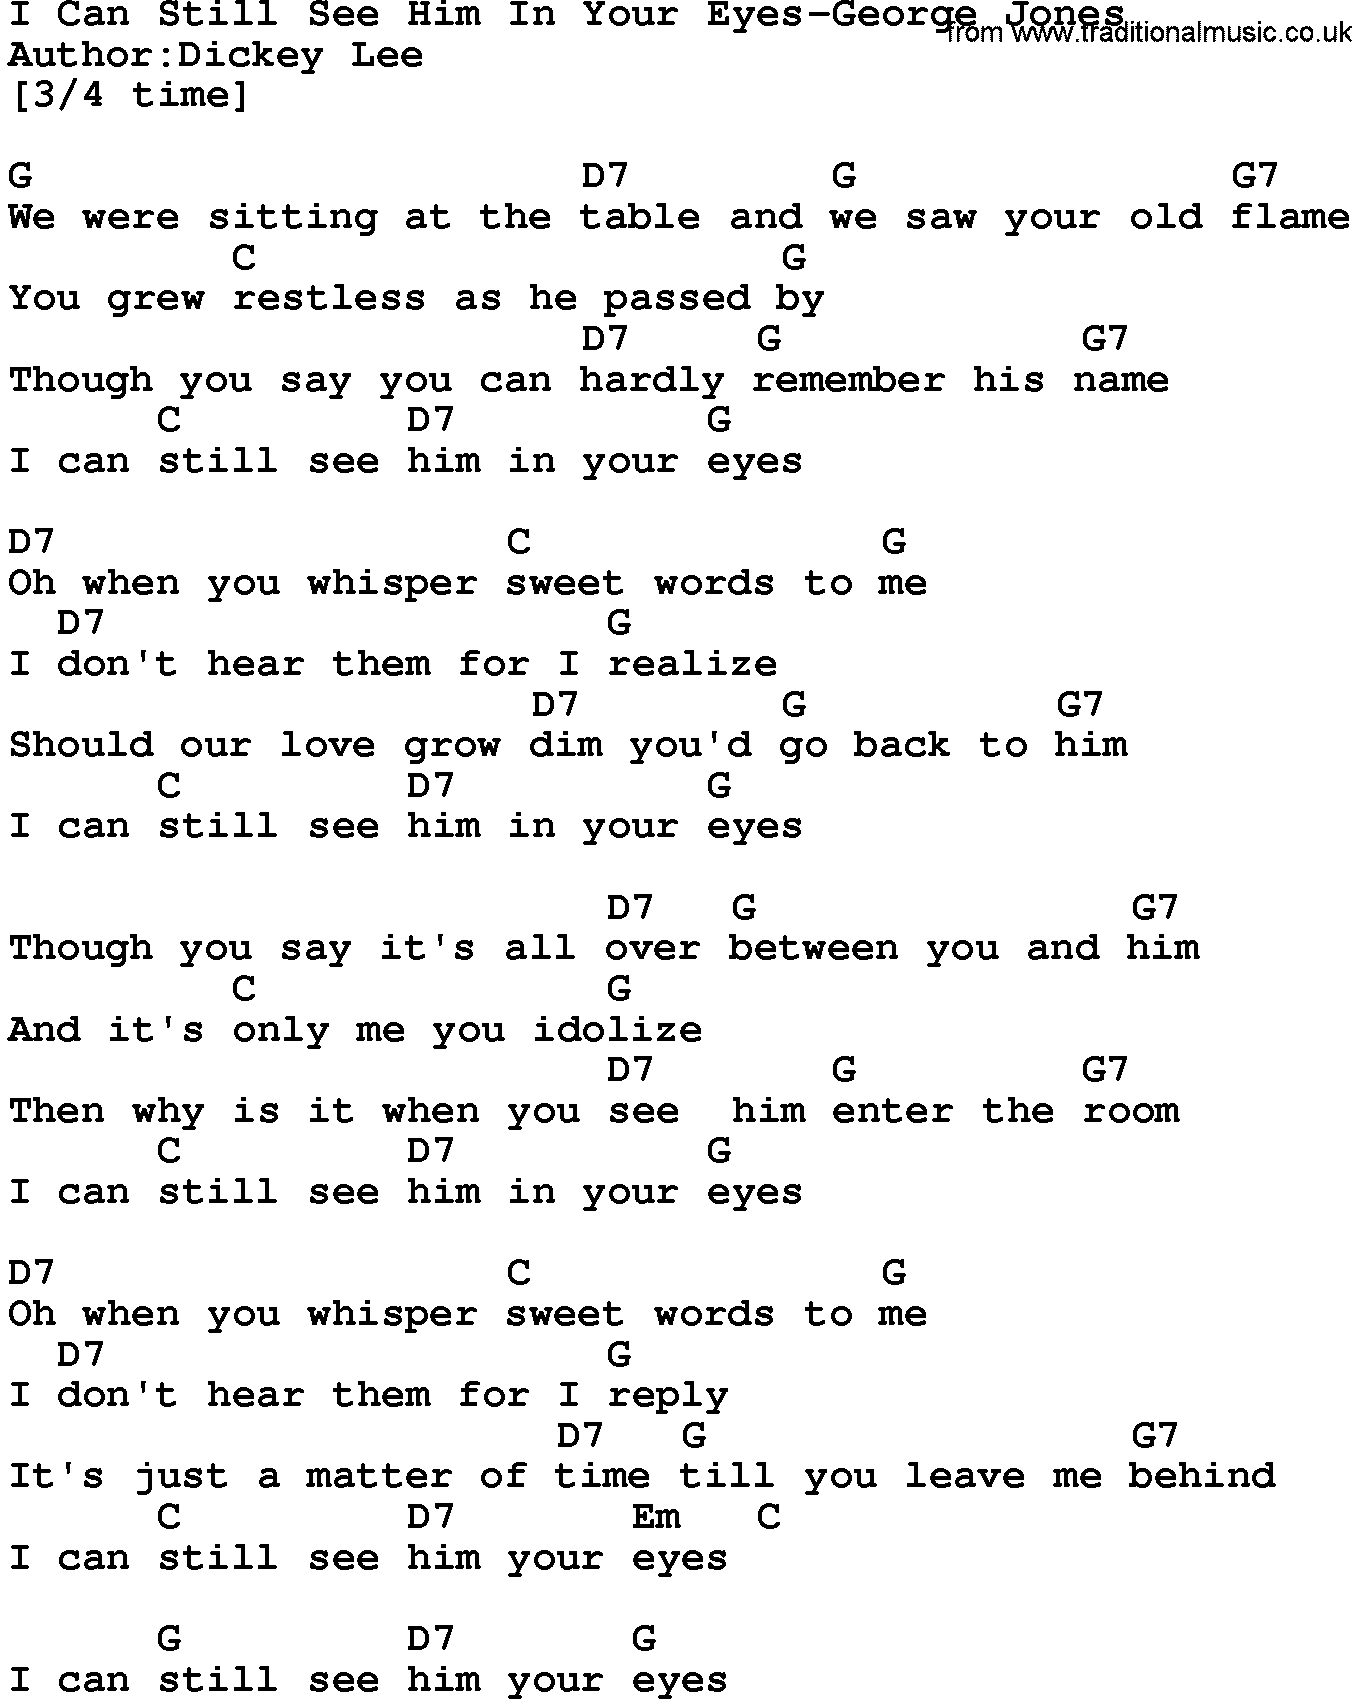 Country music song: I Can Still See Him In Your Eyes-George Jones lyrics and chords